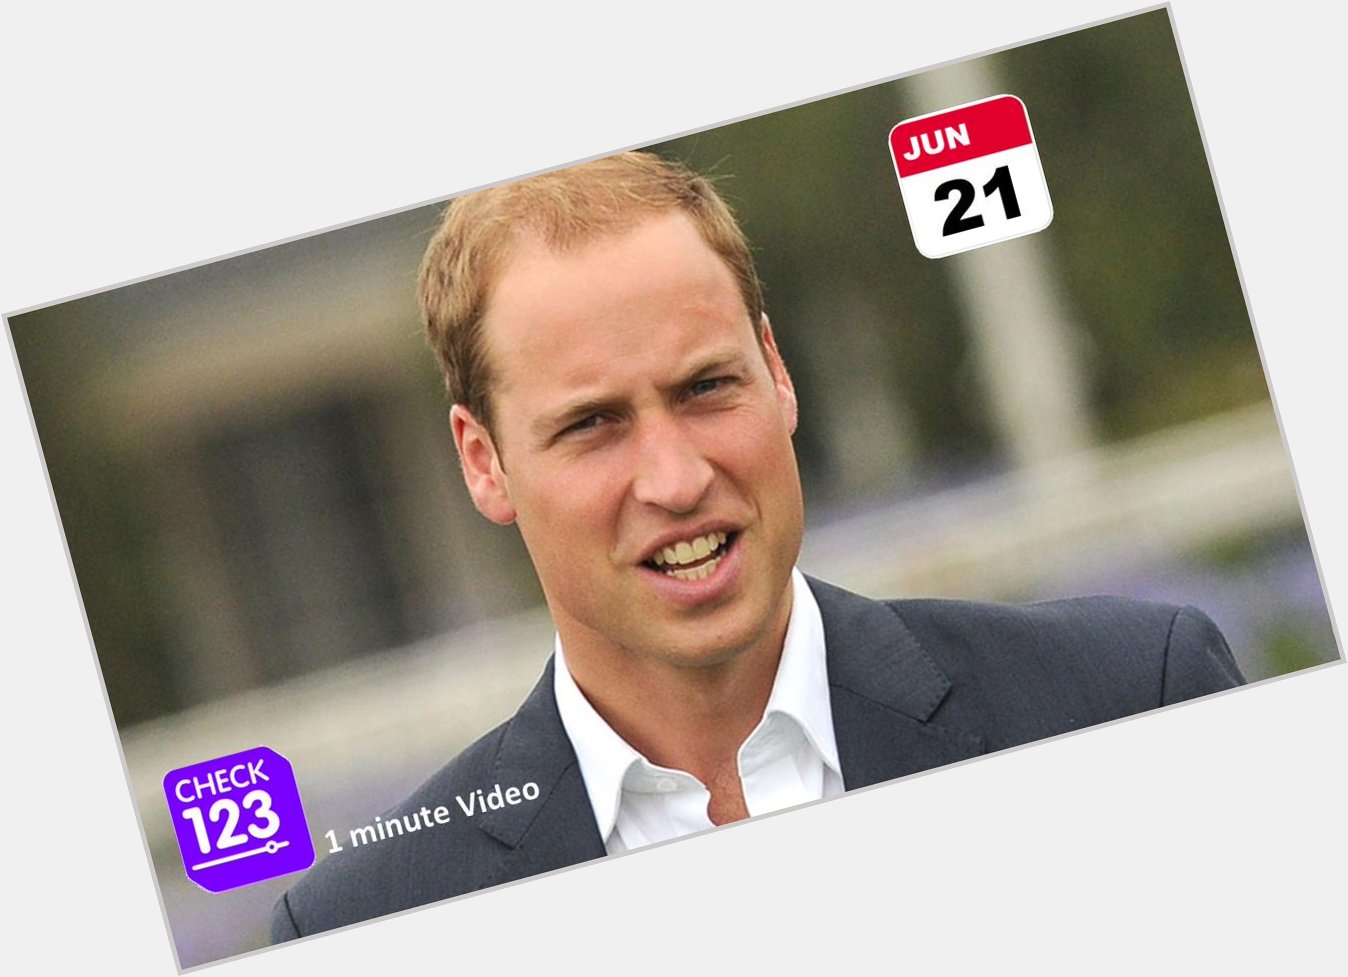 Happy Birthday Prince William!
What else happened on this day in June 21st::
 